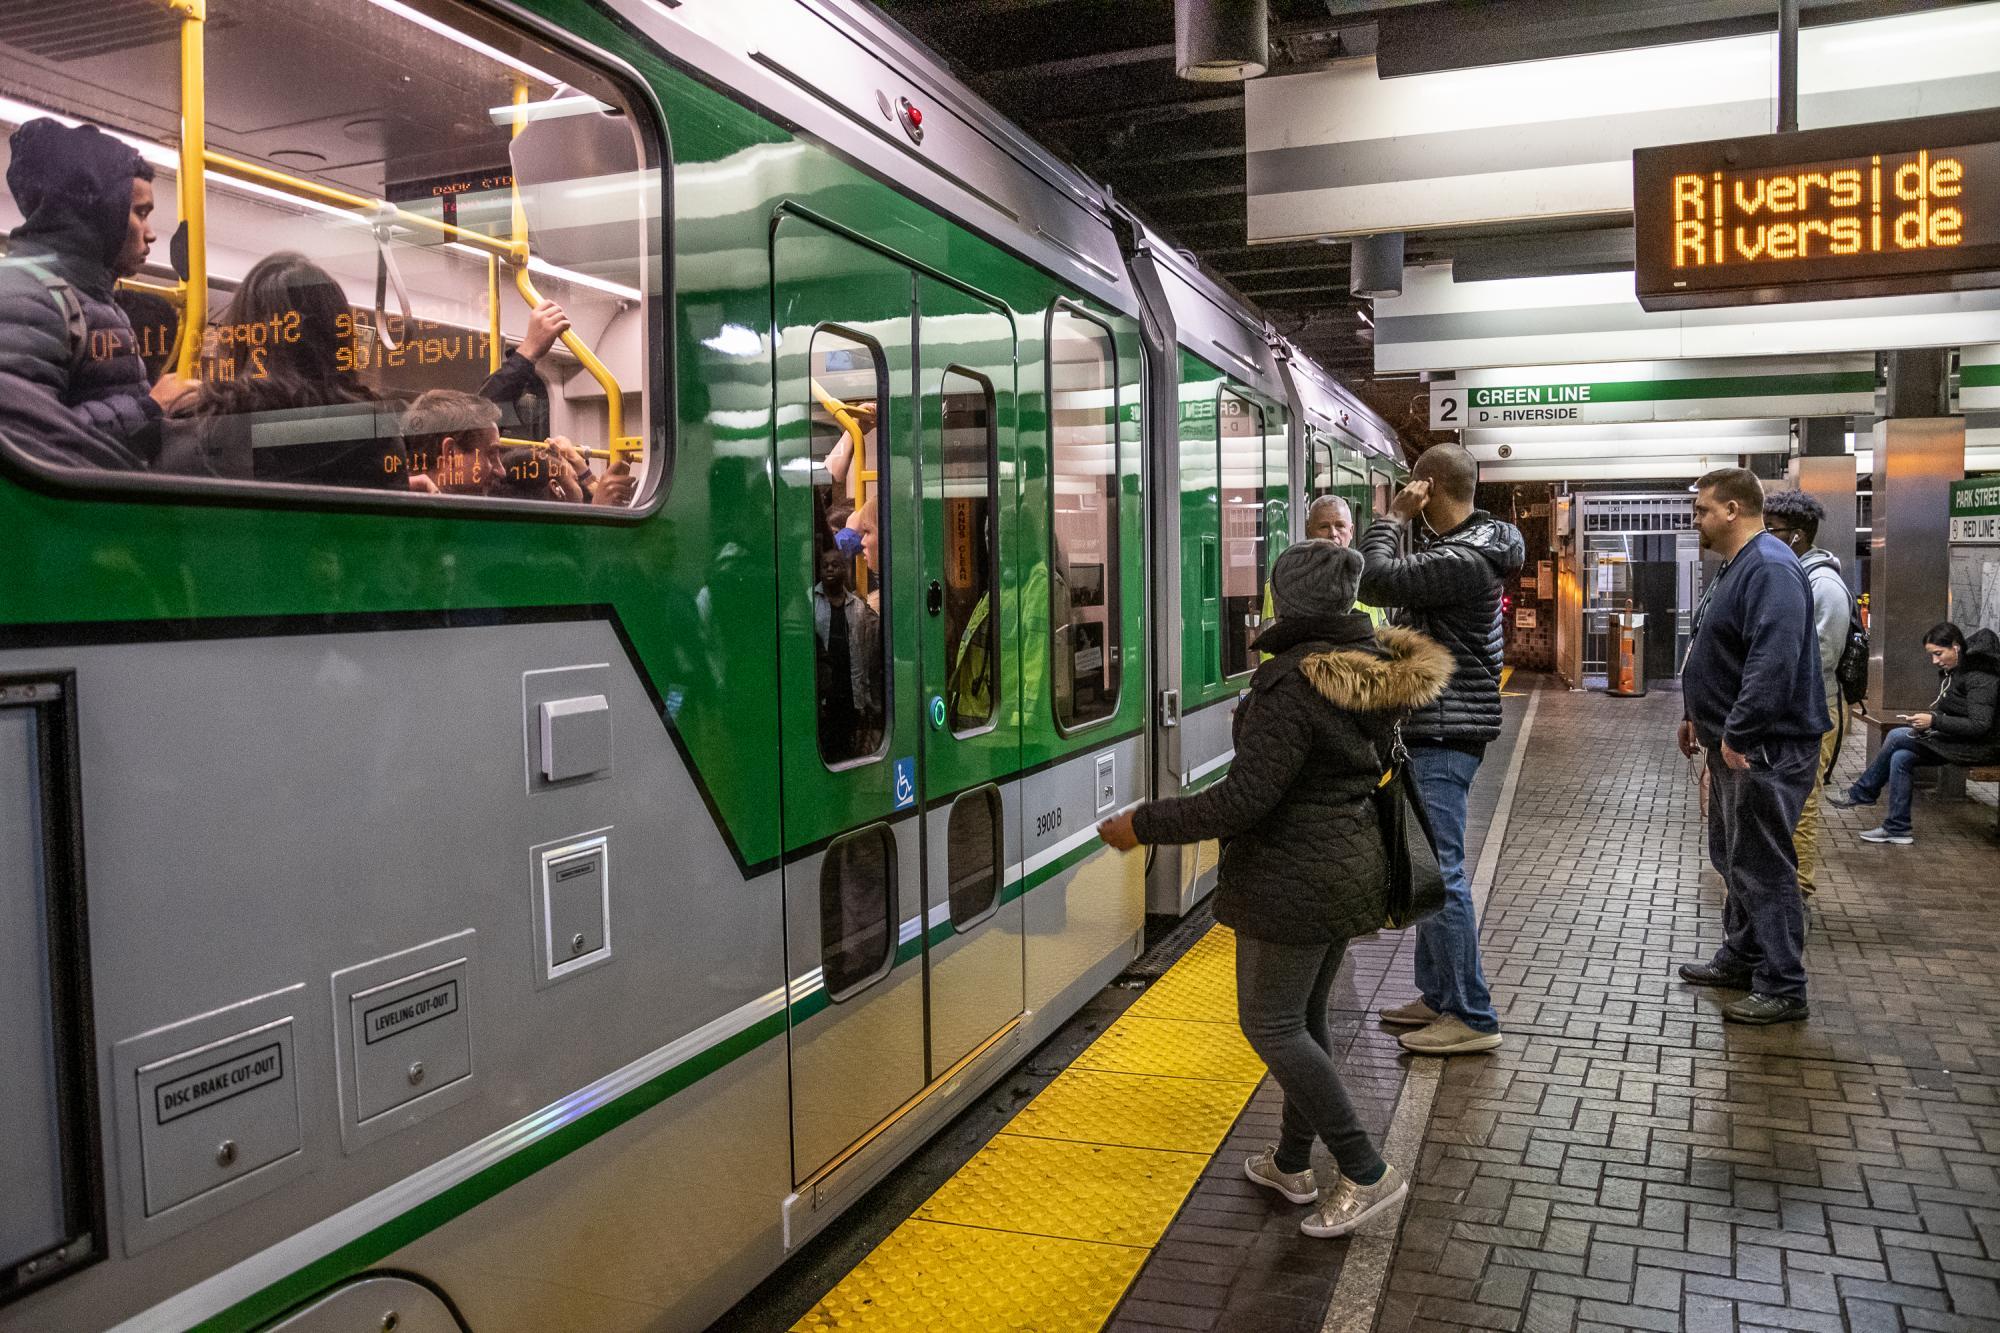 New Green Line Type 9 car at North Station, with passengers aboard and waiting on the platform